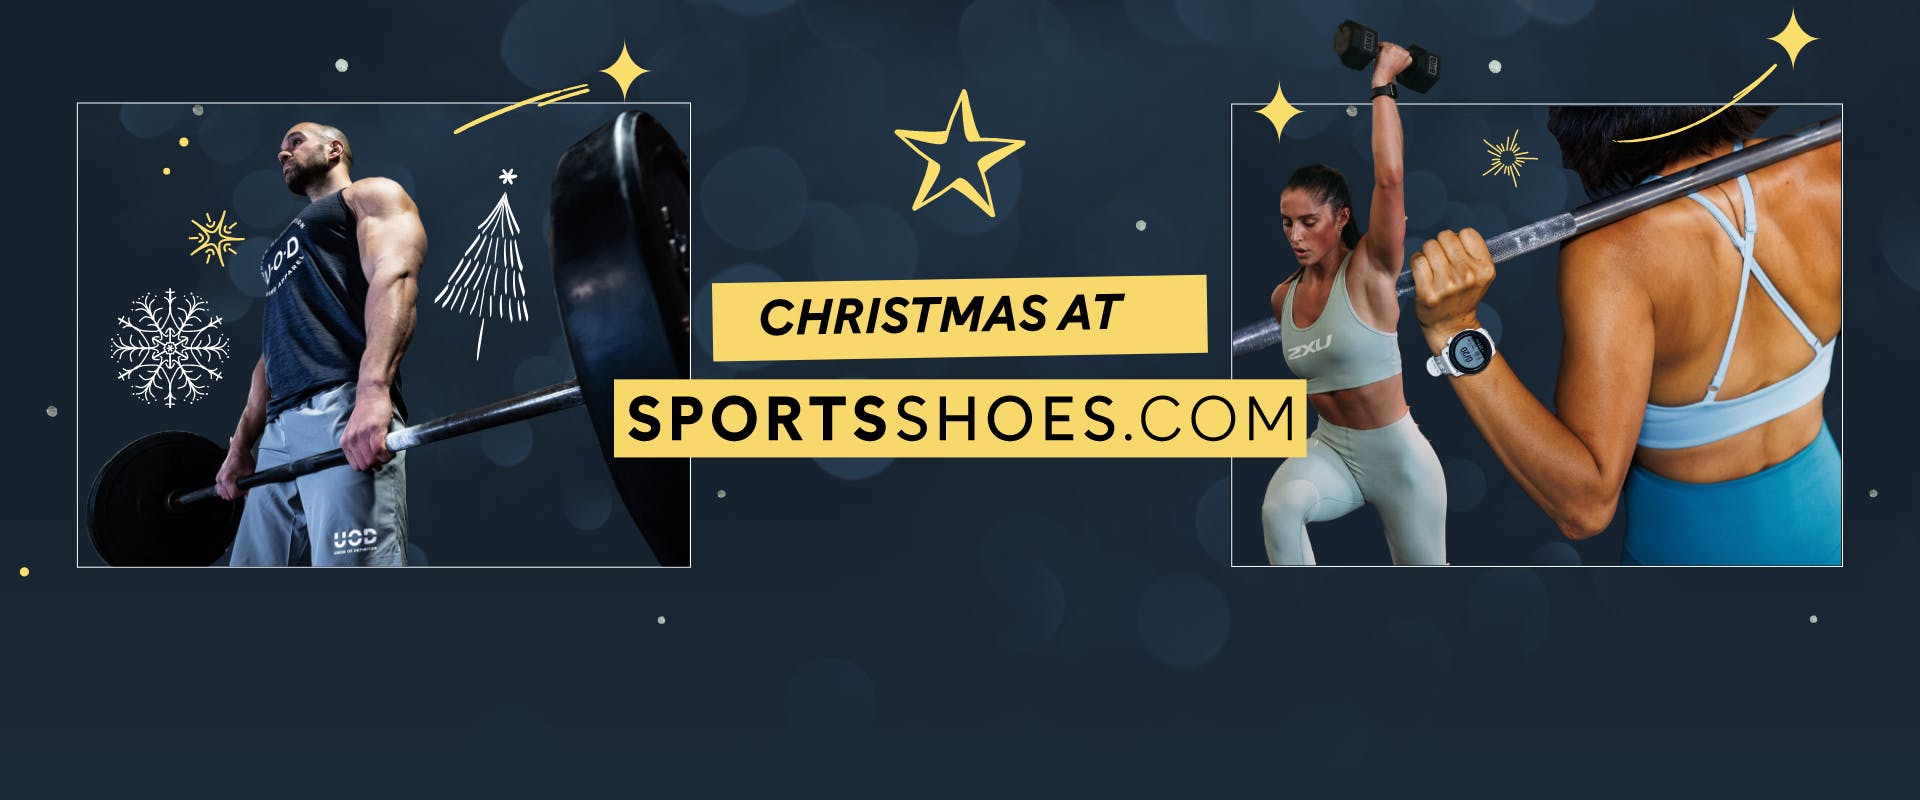 Christmas at SportsShoes